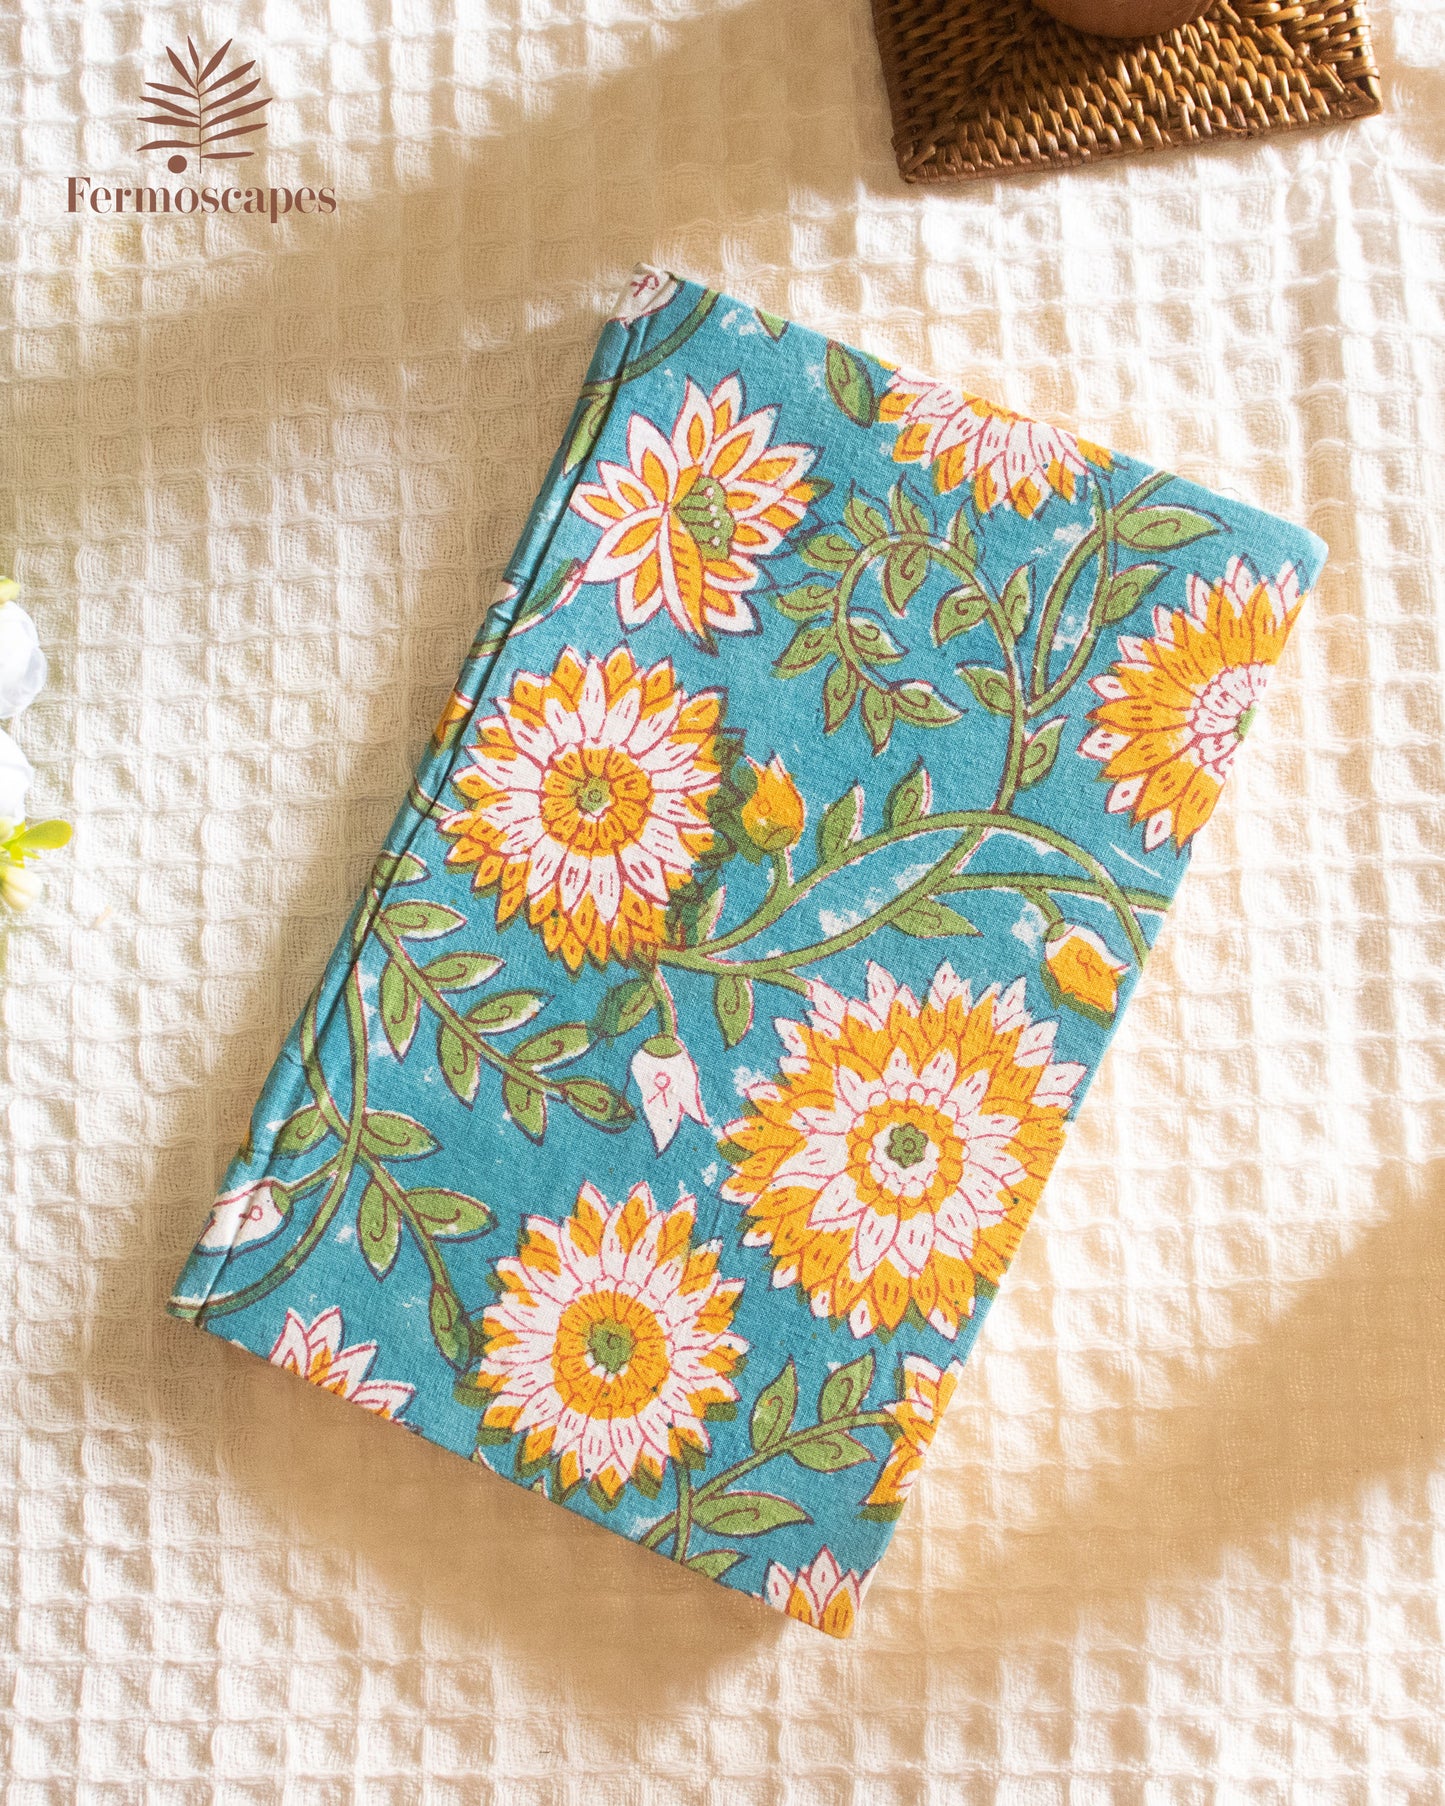 Handmade block printed diary- Yellow and turquoise floral